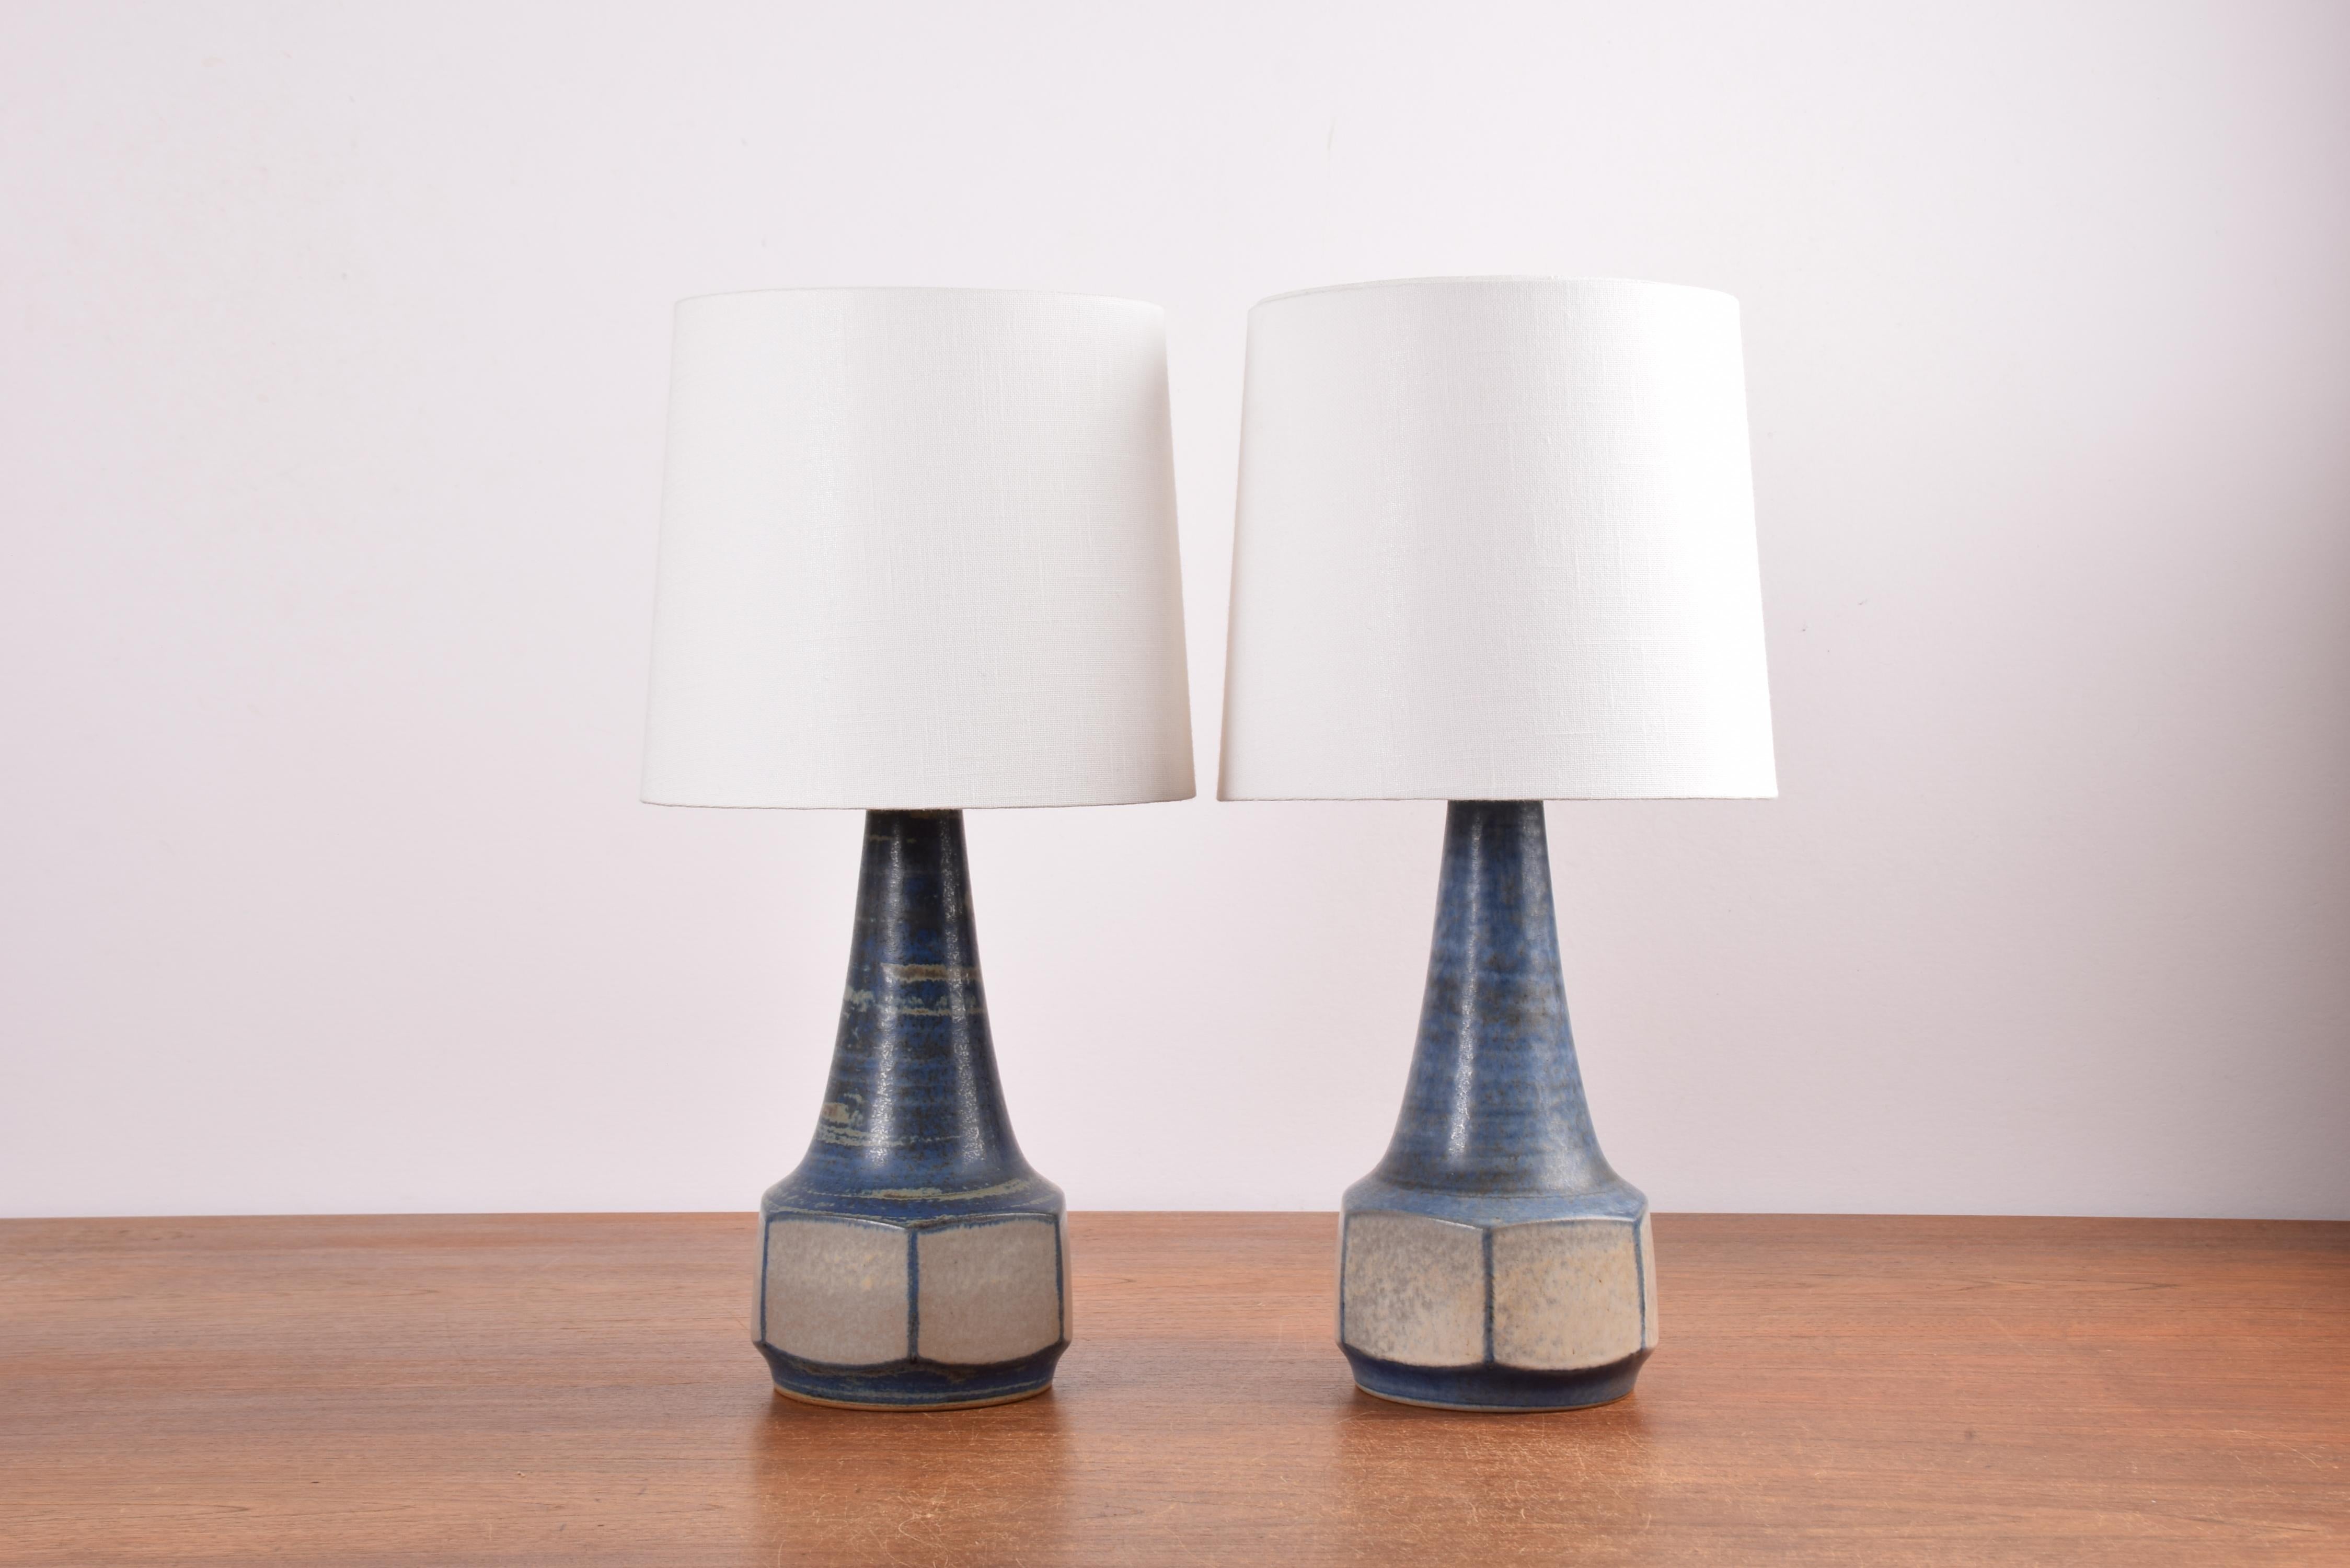 Pair of table lamps designed by Marianne Starck for Michael Andersen. Made circa 1960s or 1970s.
The lamps are made from stoneware and have a matte blue and gray glaze with some beige elements.
Due to the firing process the glaze has a unique